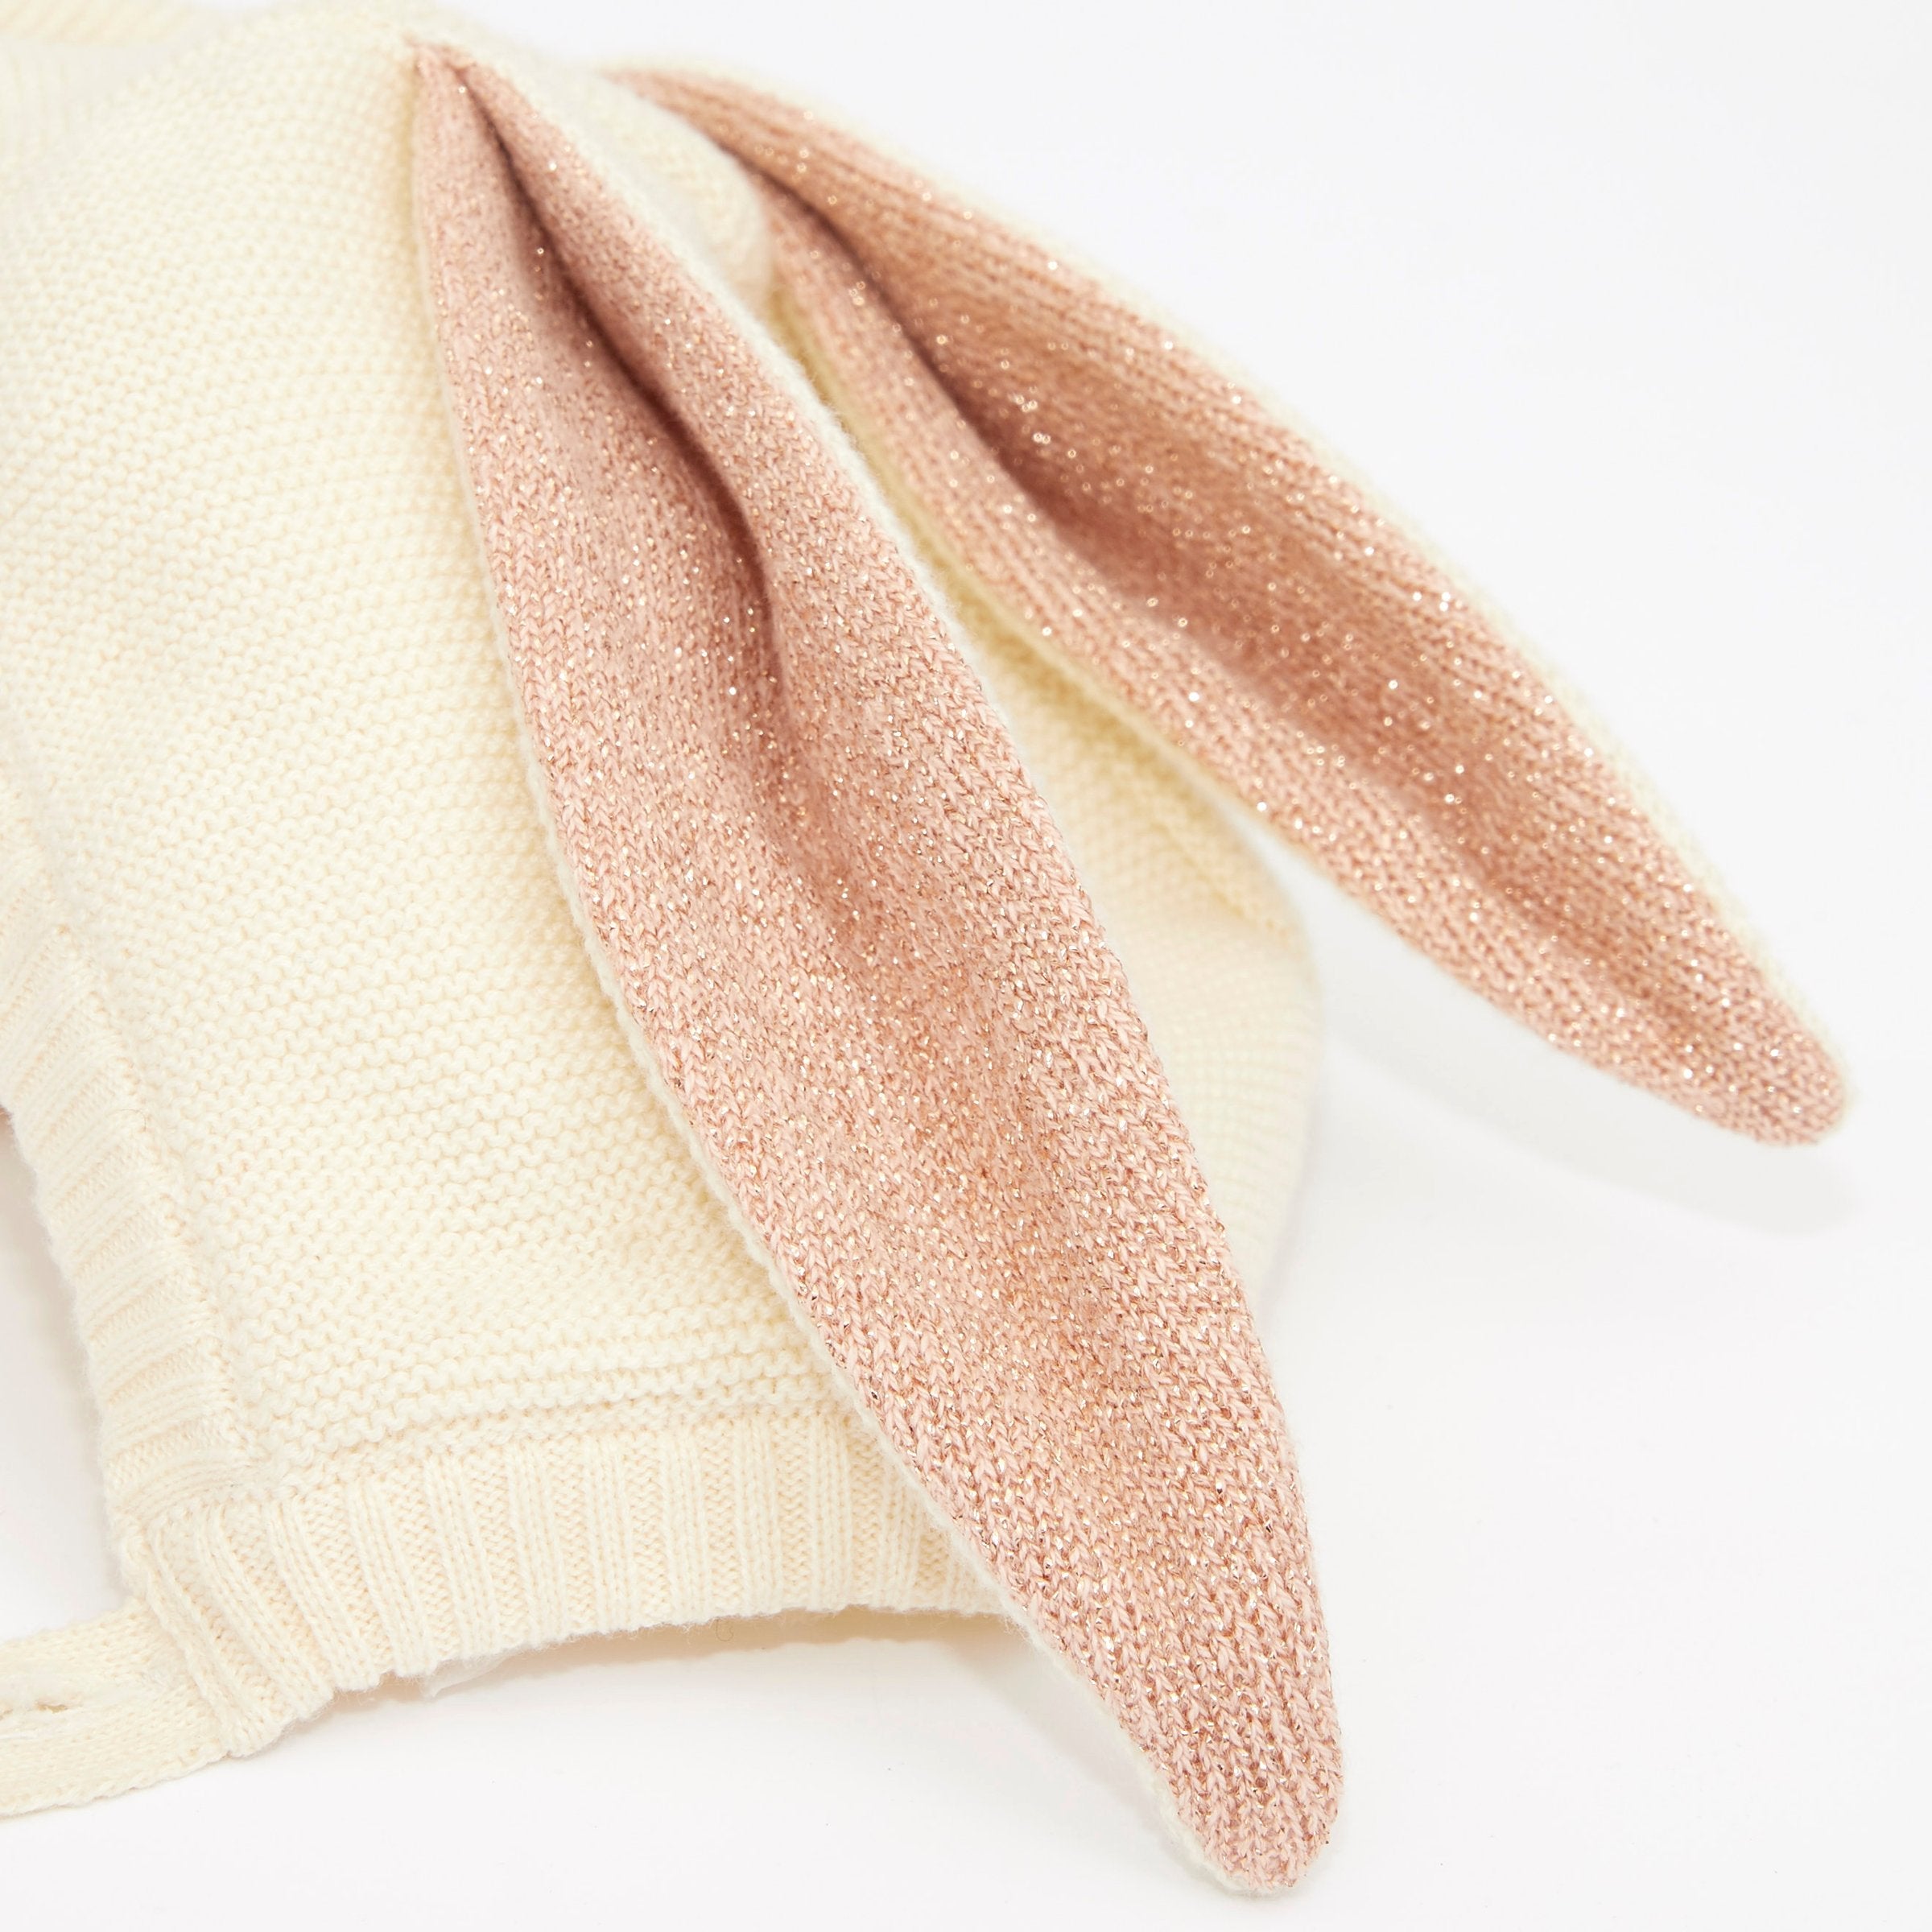 This organic cotton bunny bonnet has a shimmering peach inner on the ears, and an ivory coloured button fastening.